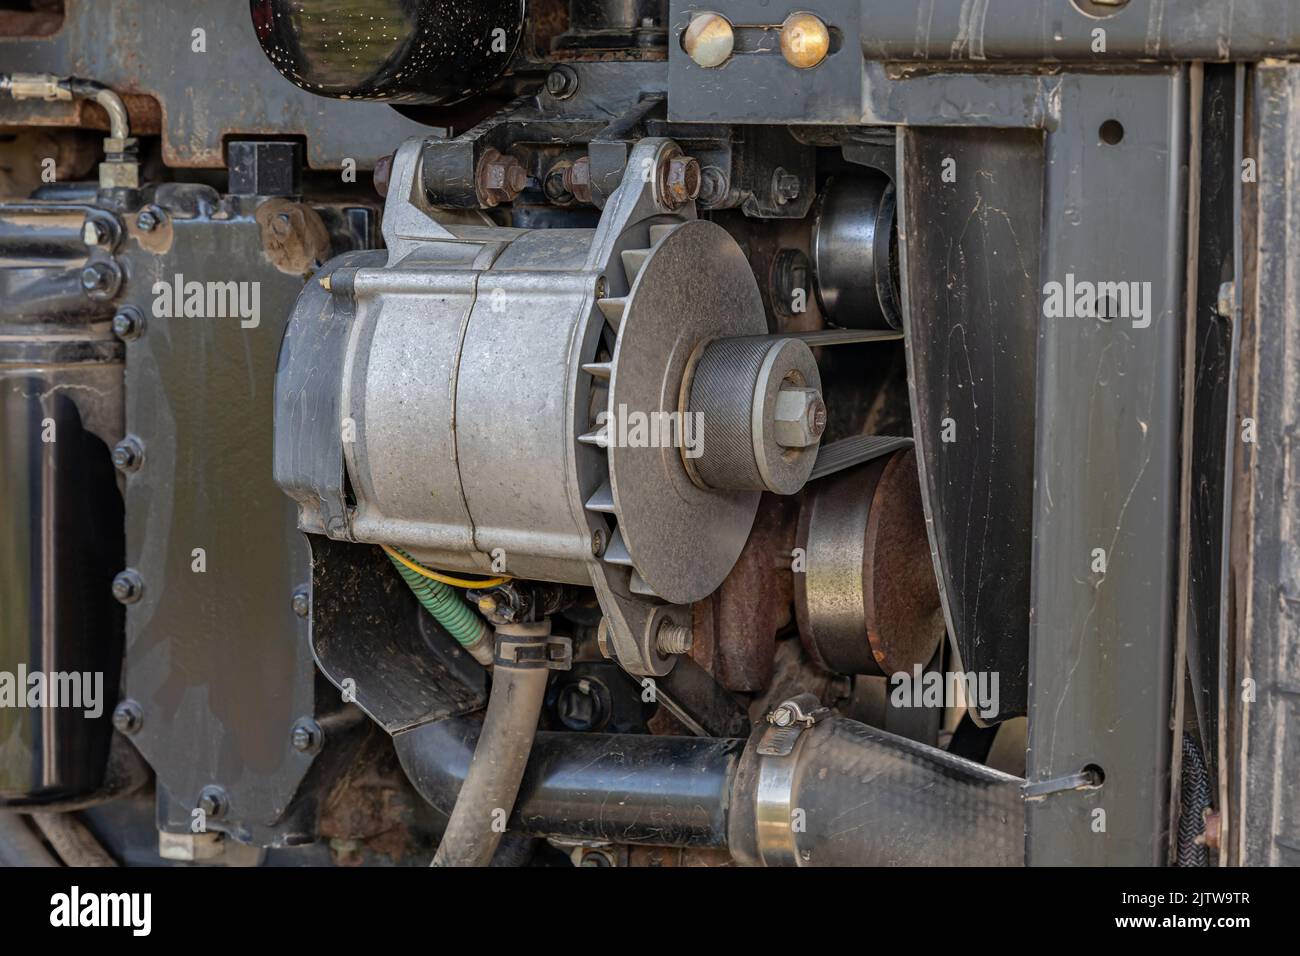 Alternator and serpentine belt on farm tractor. Agriculture and farming equipment repair, maintenance and service concept Stock Photo